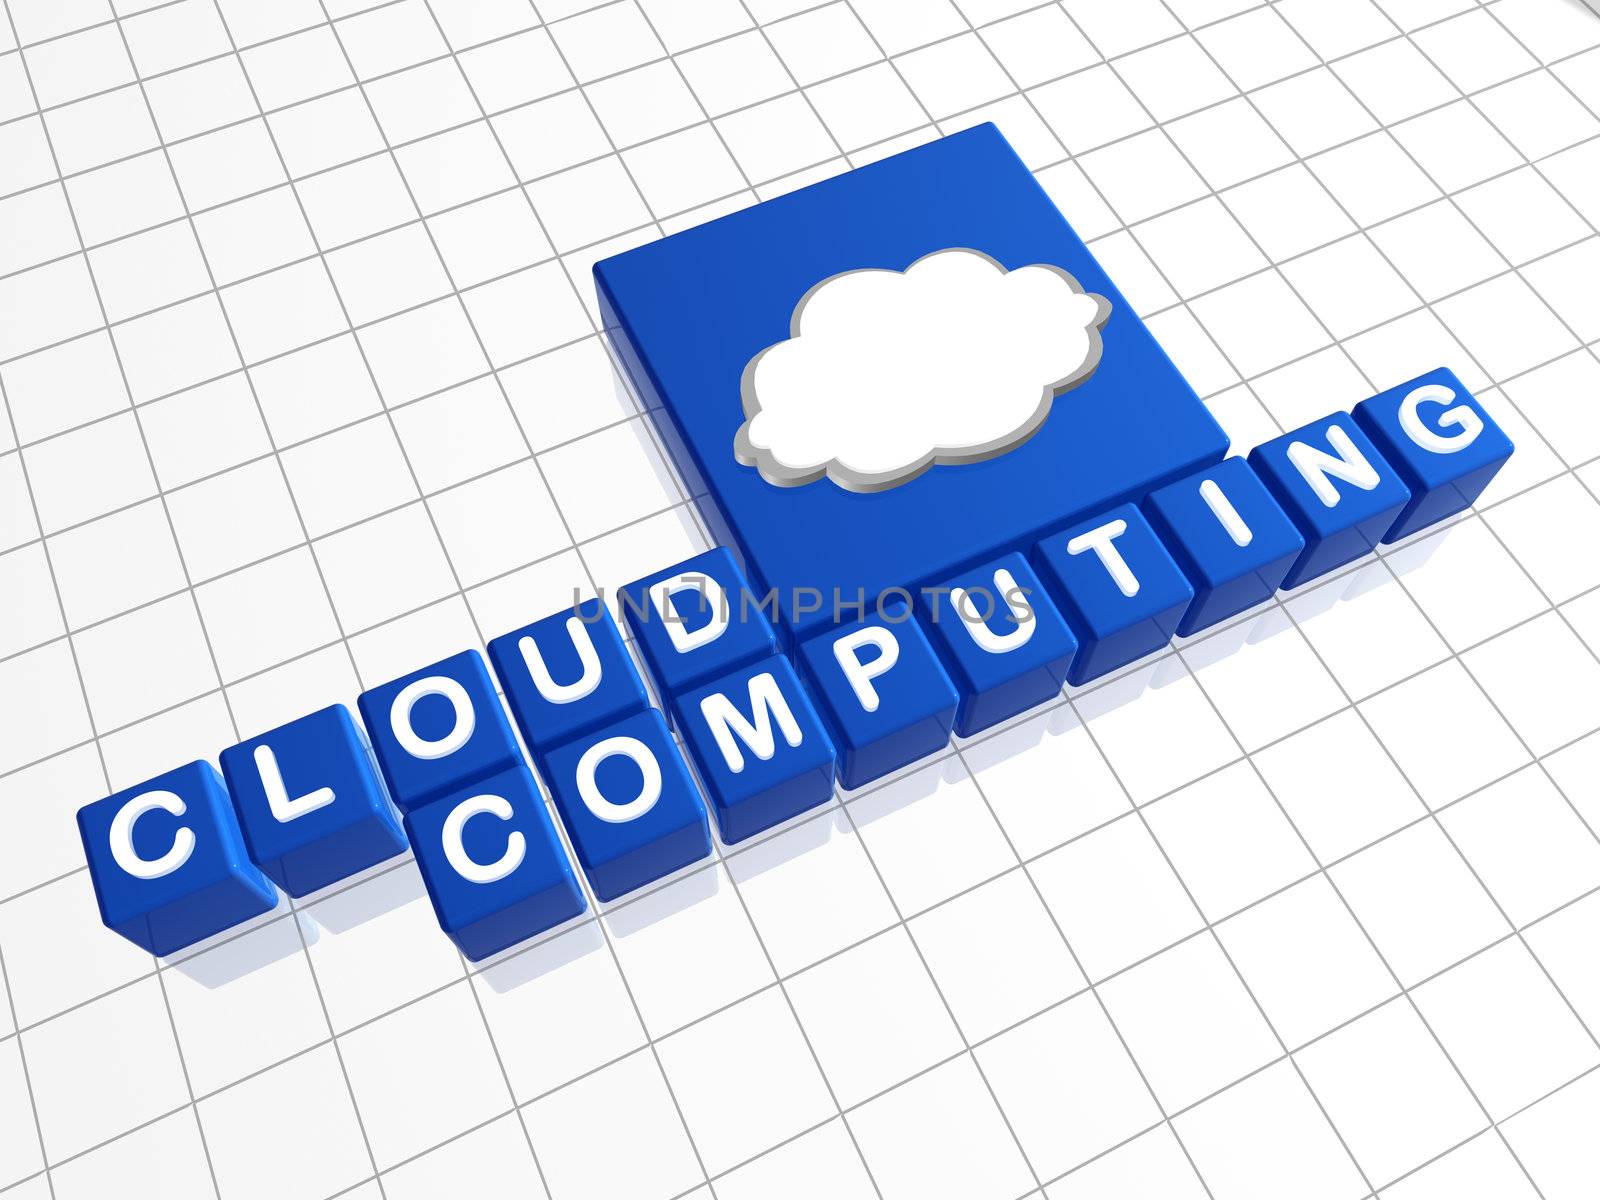 cloud computing - blue boxes with white text and pictogram